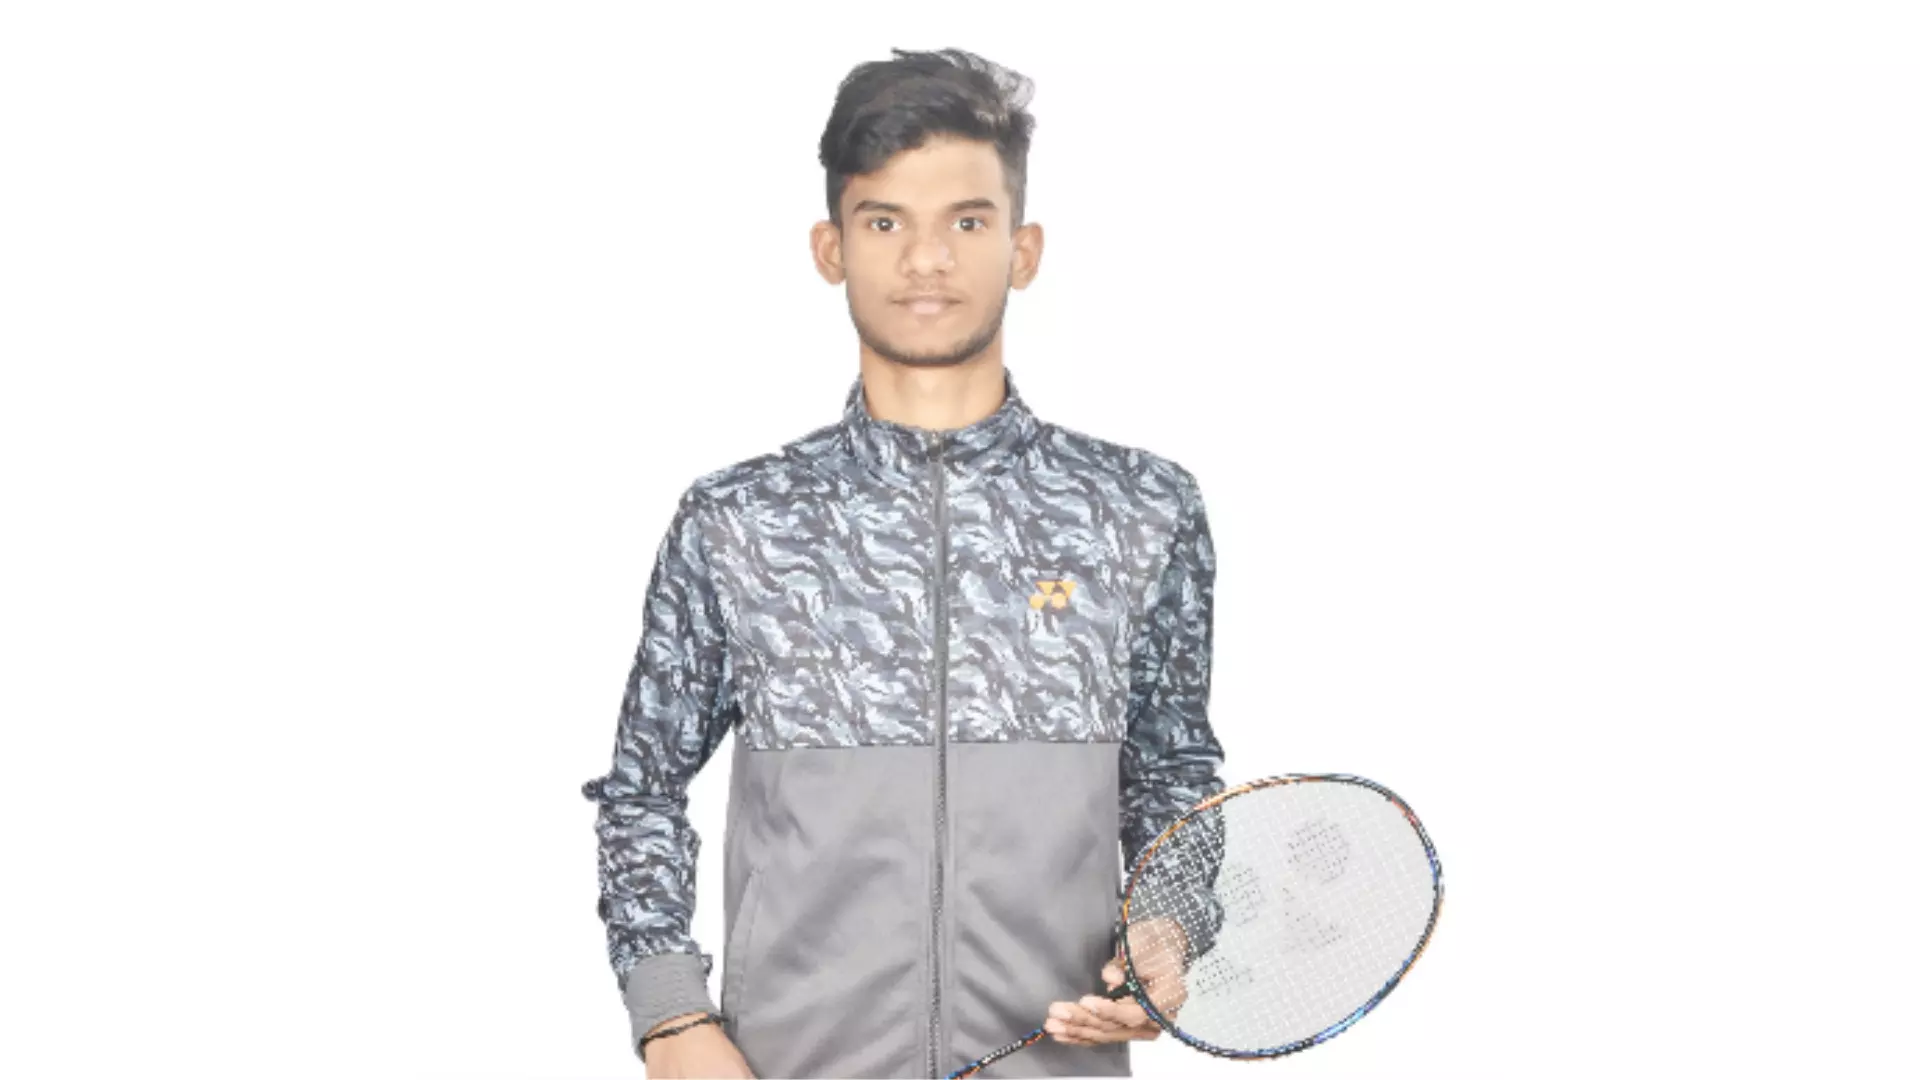 Sataksh Singh: An Upcoming Player with Potential in Indian Badminton